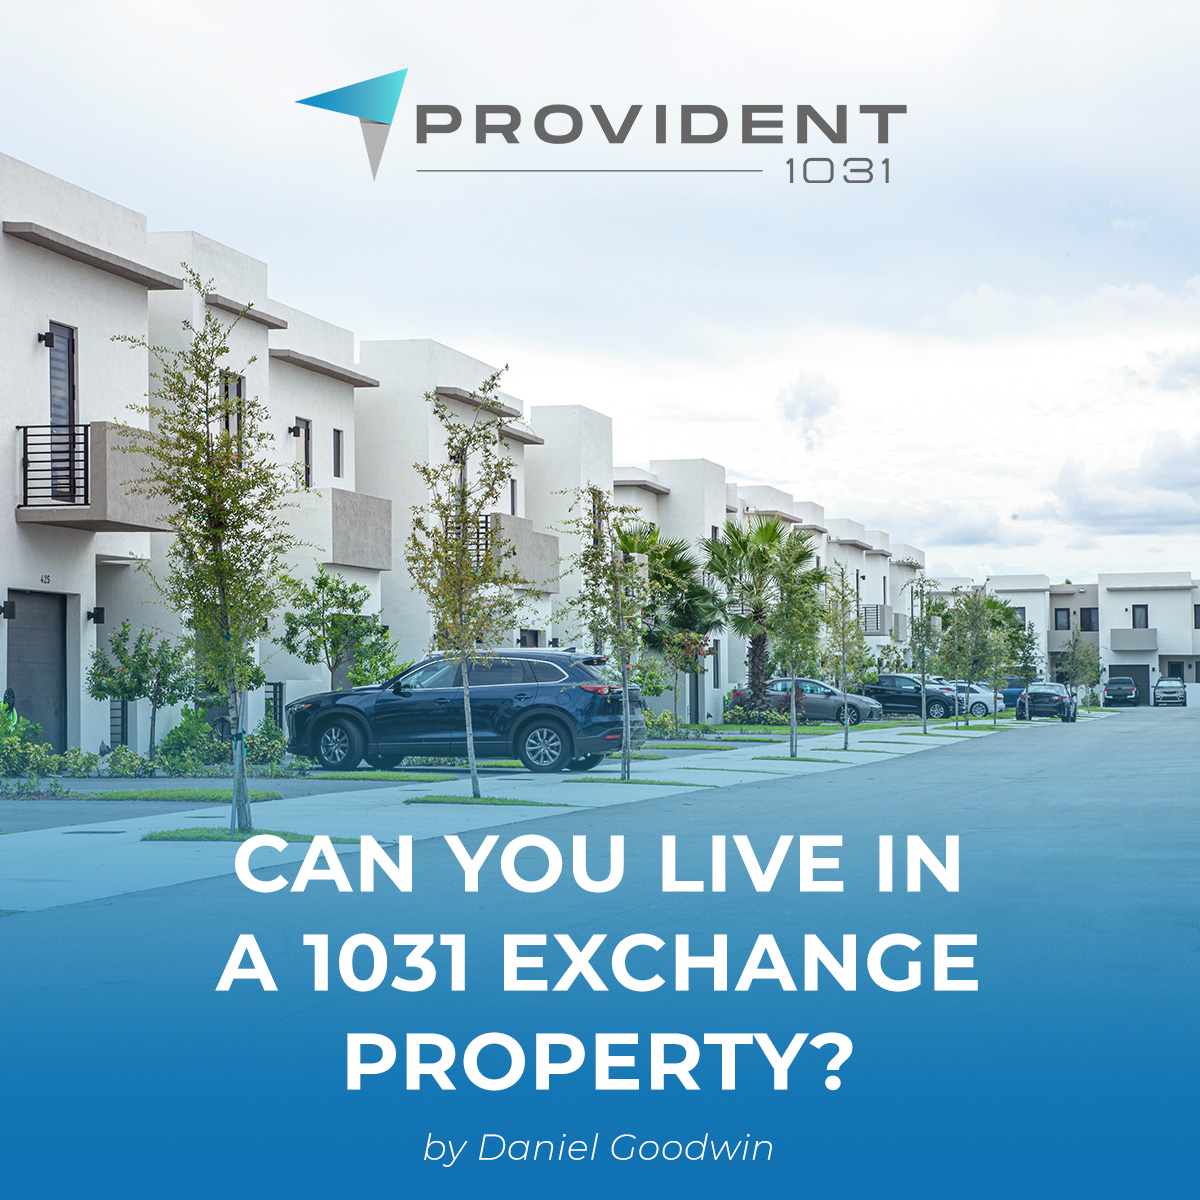 Can You Live In A 1031 Exchange Property? - Daniel Goodwin